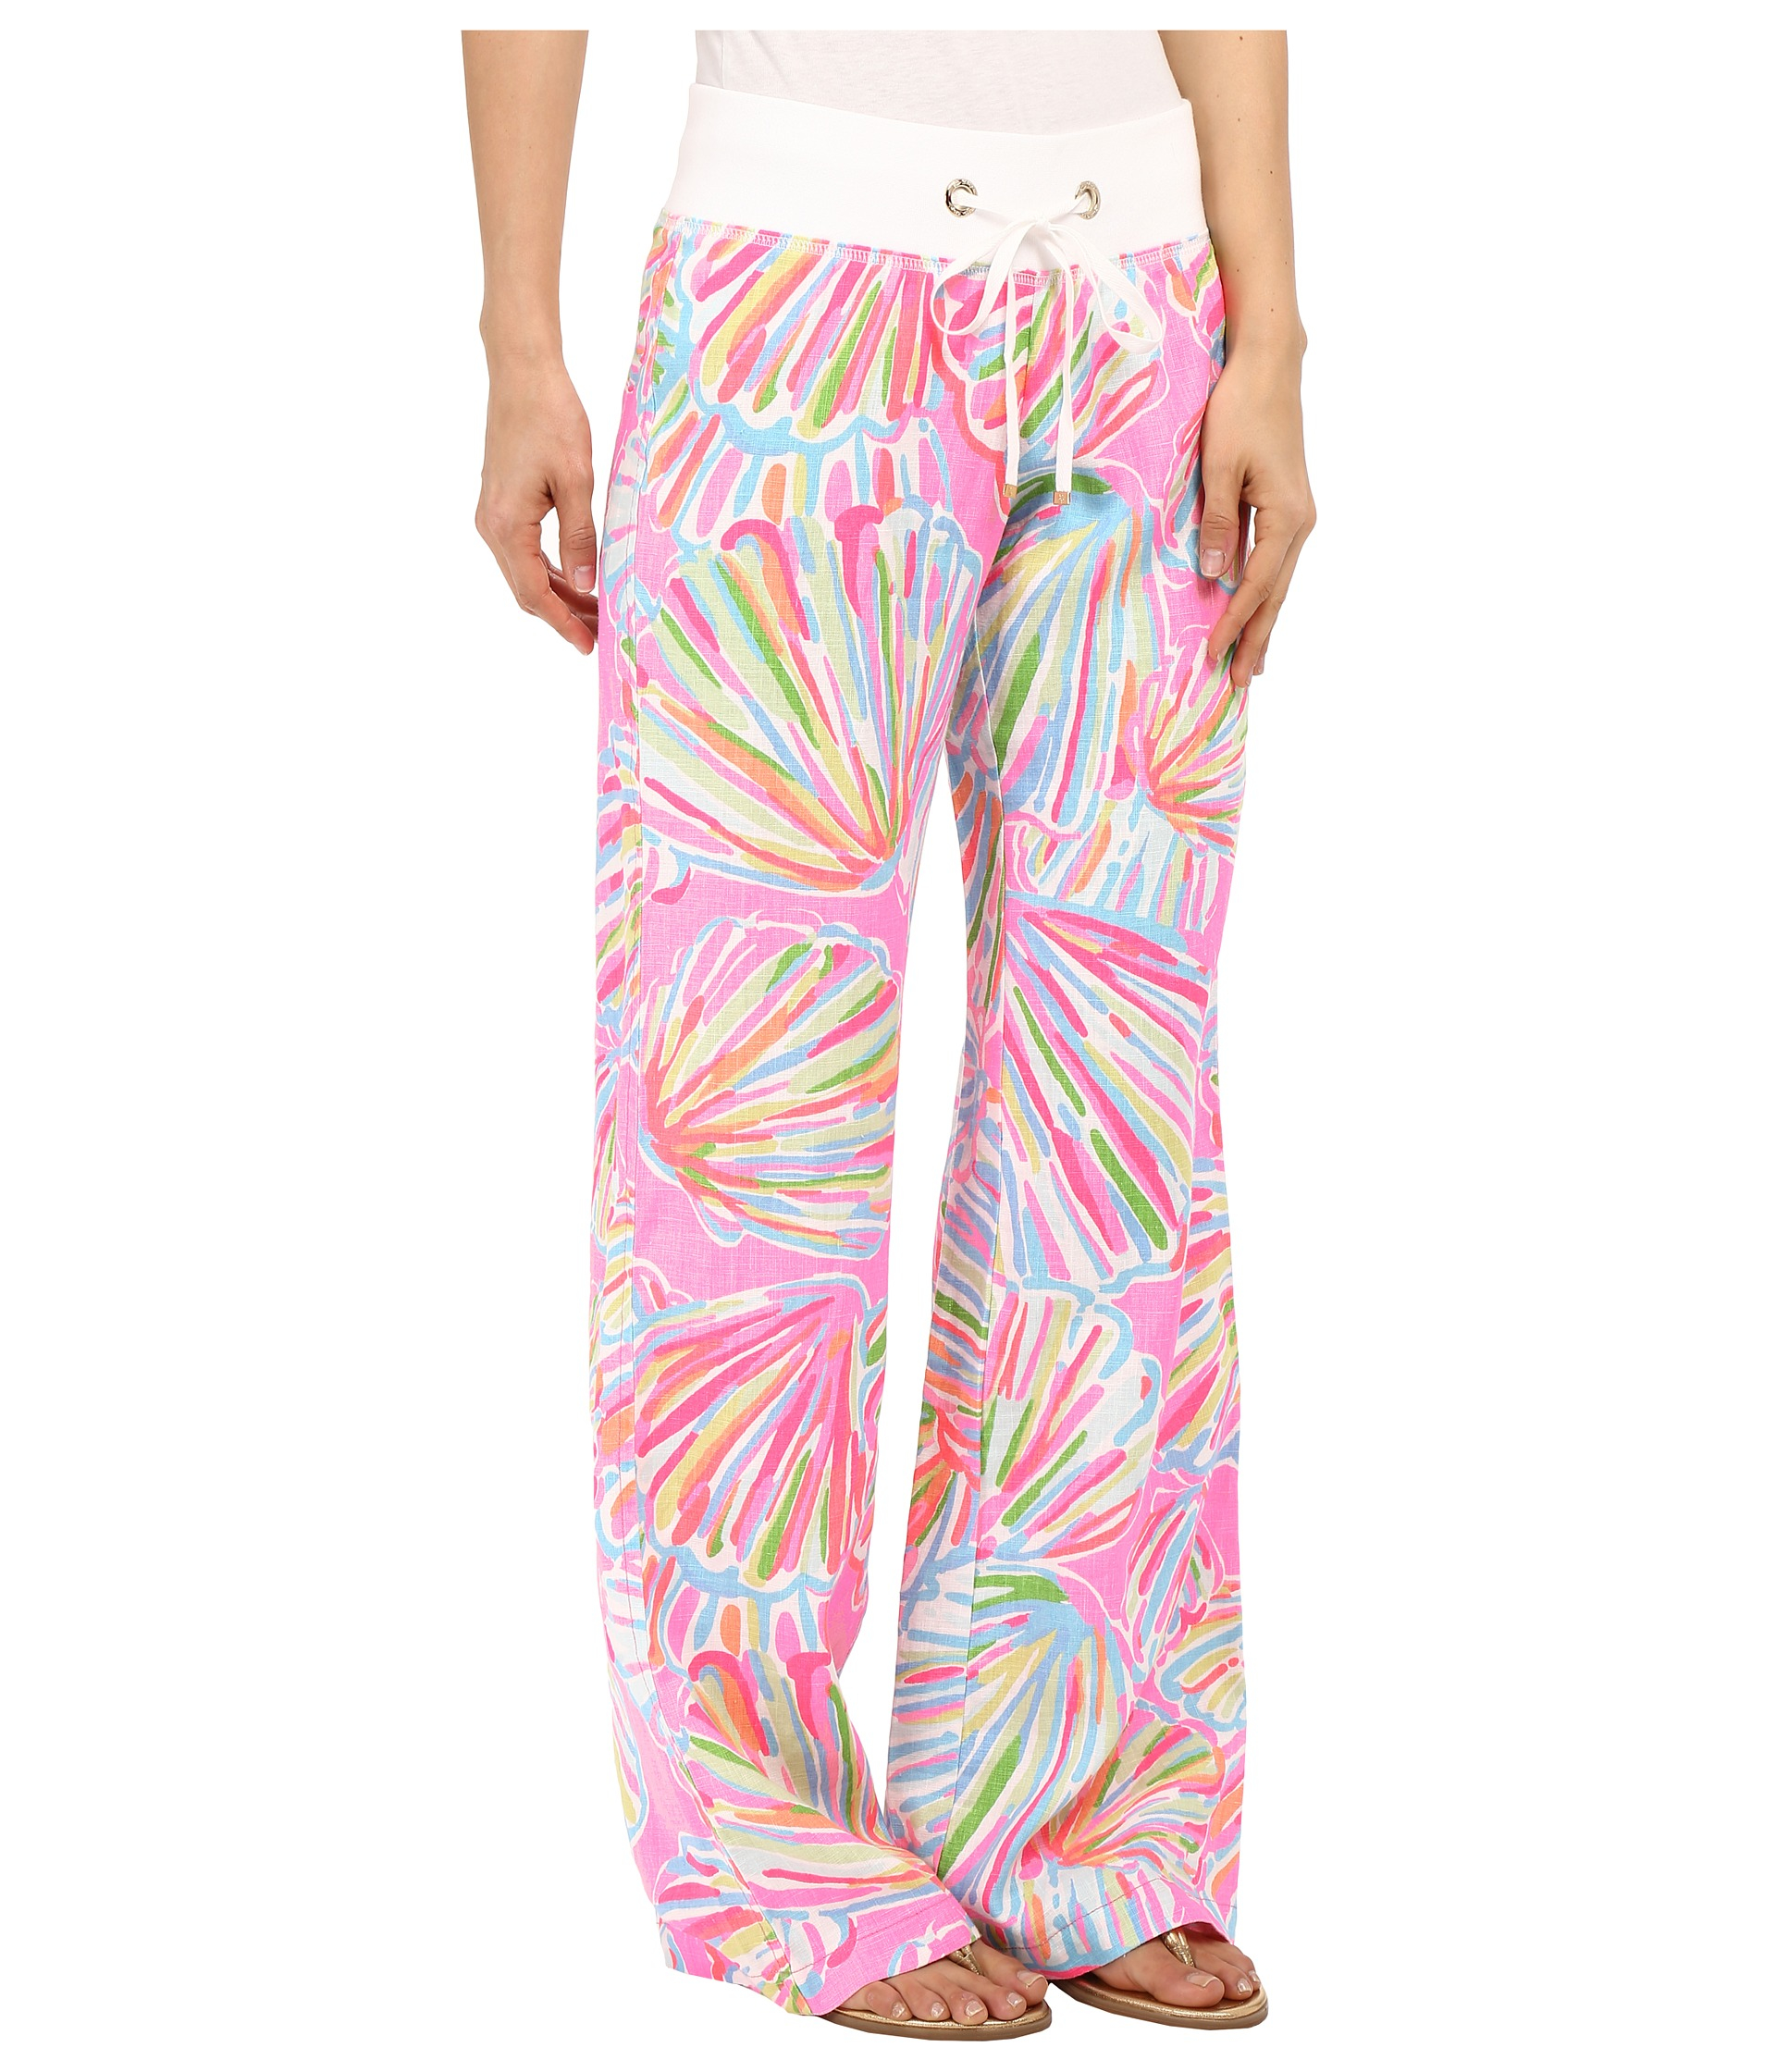 Lyst - Lilly Pulitzer Beach Pant in Pink